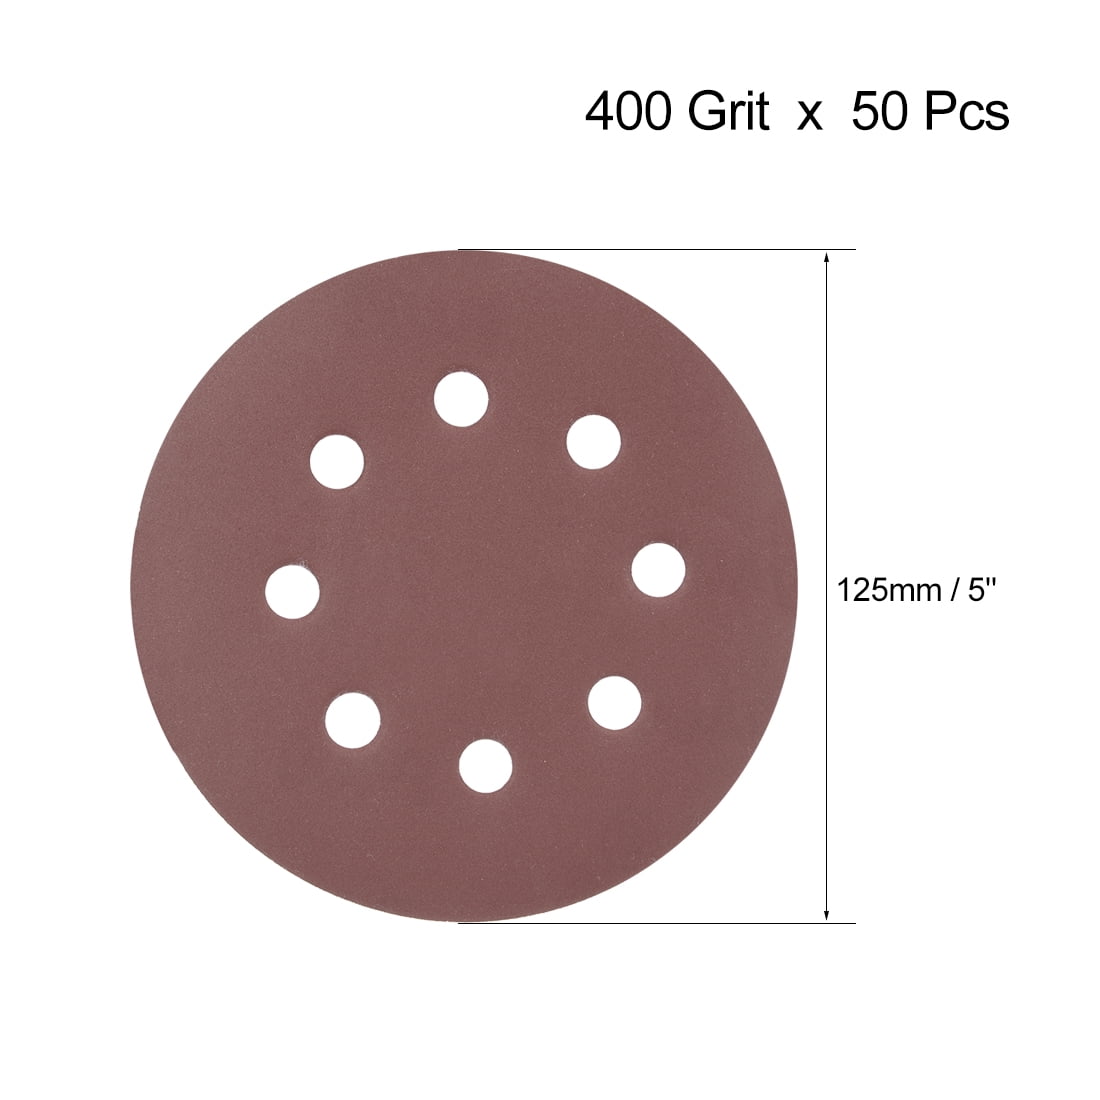 Self Adhesive Sanding Discs With Tab 400 Grit 5" 8 Holes pkg of 50 Keen 